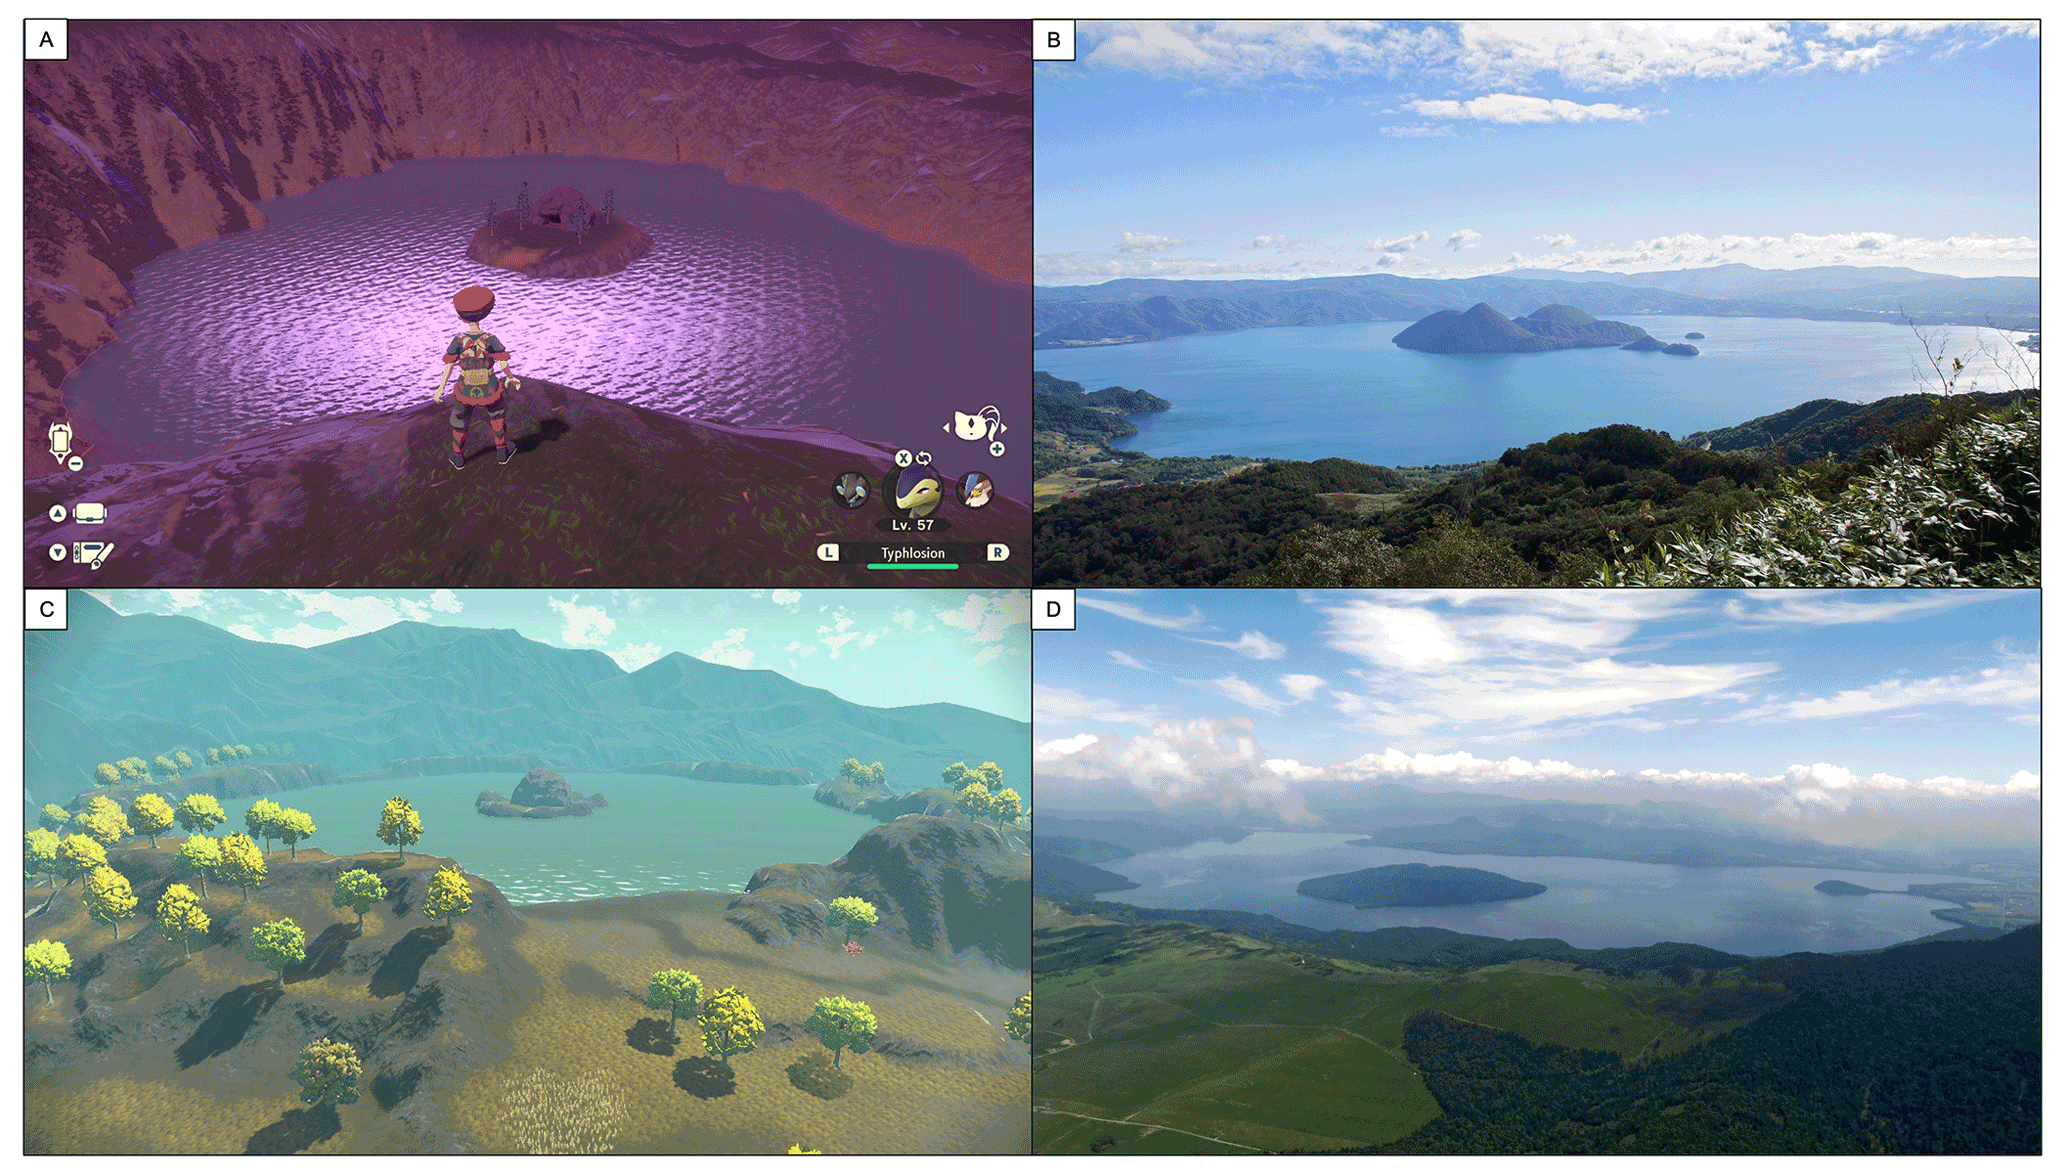 GC - The potential for using video games to teach geoscience